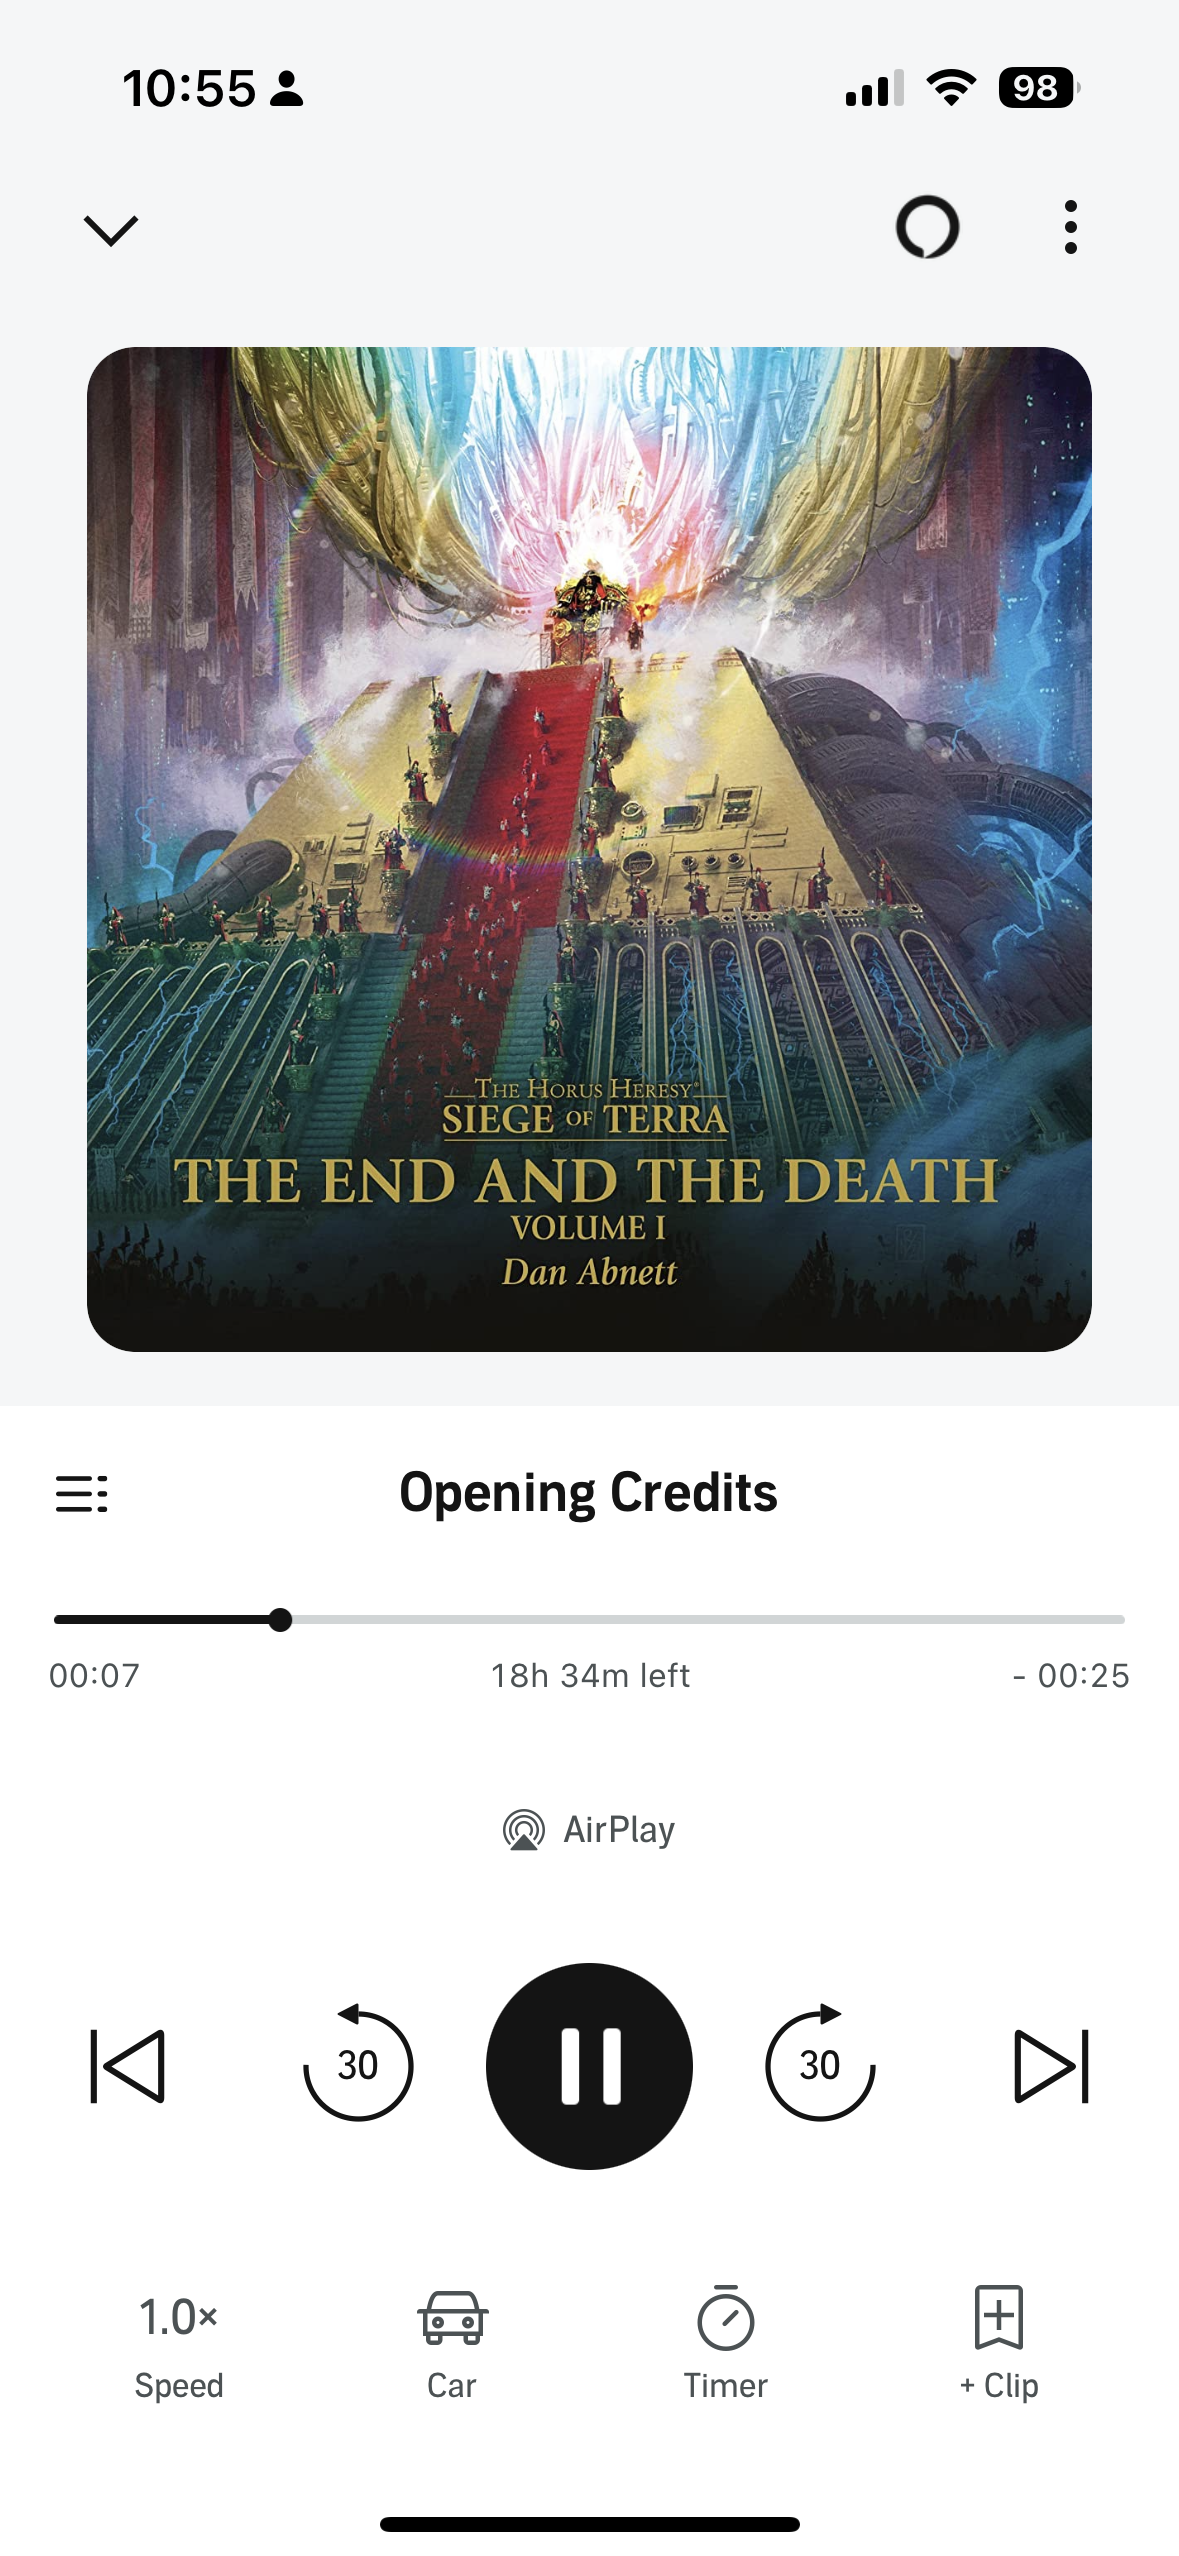 a screenshot of the Audible iOS UI. The in-progress book is The End and the Death, by Dan Abnett